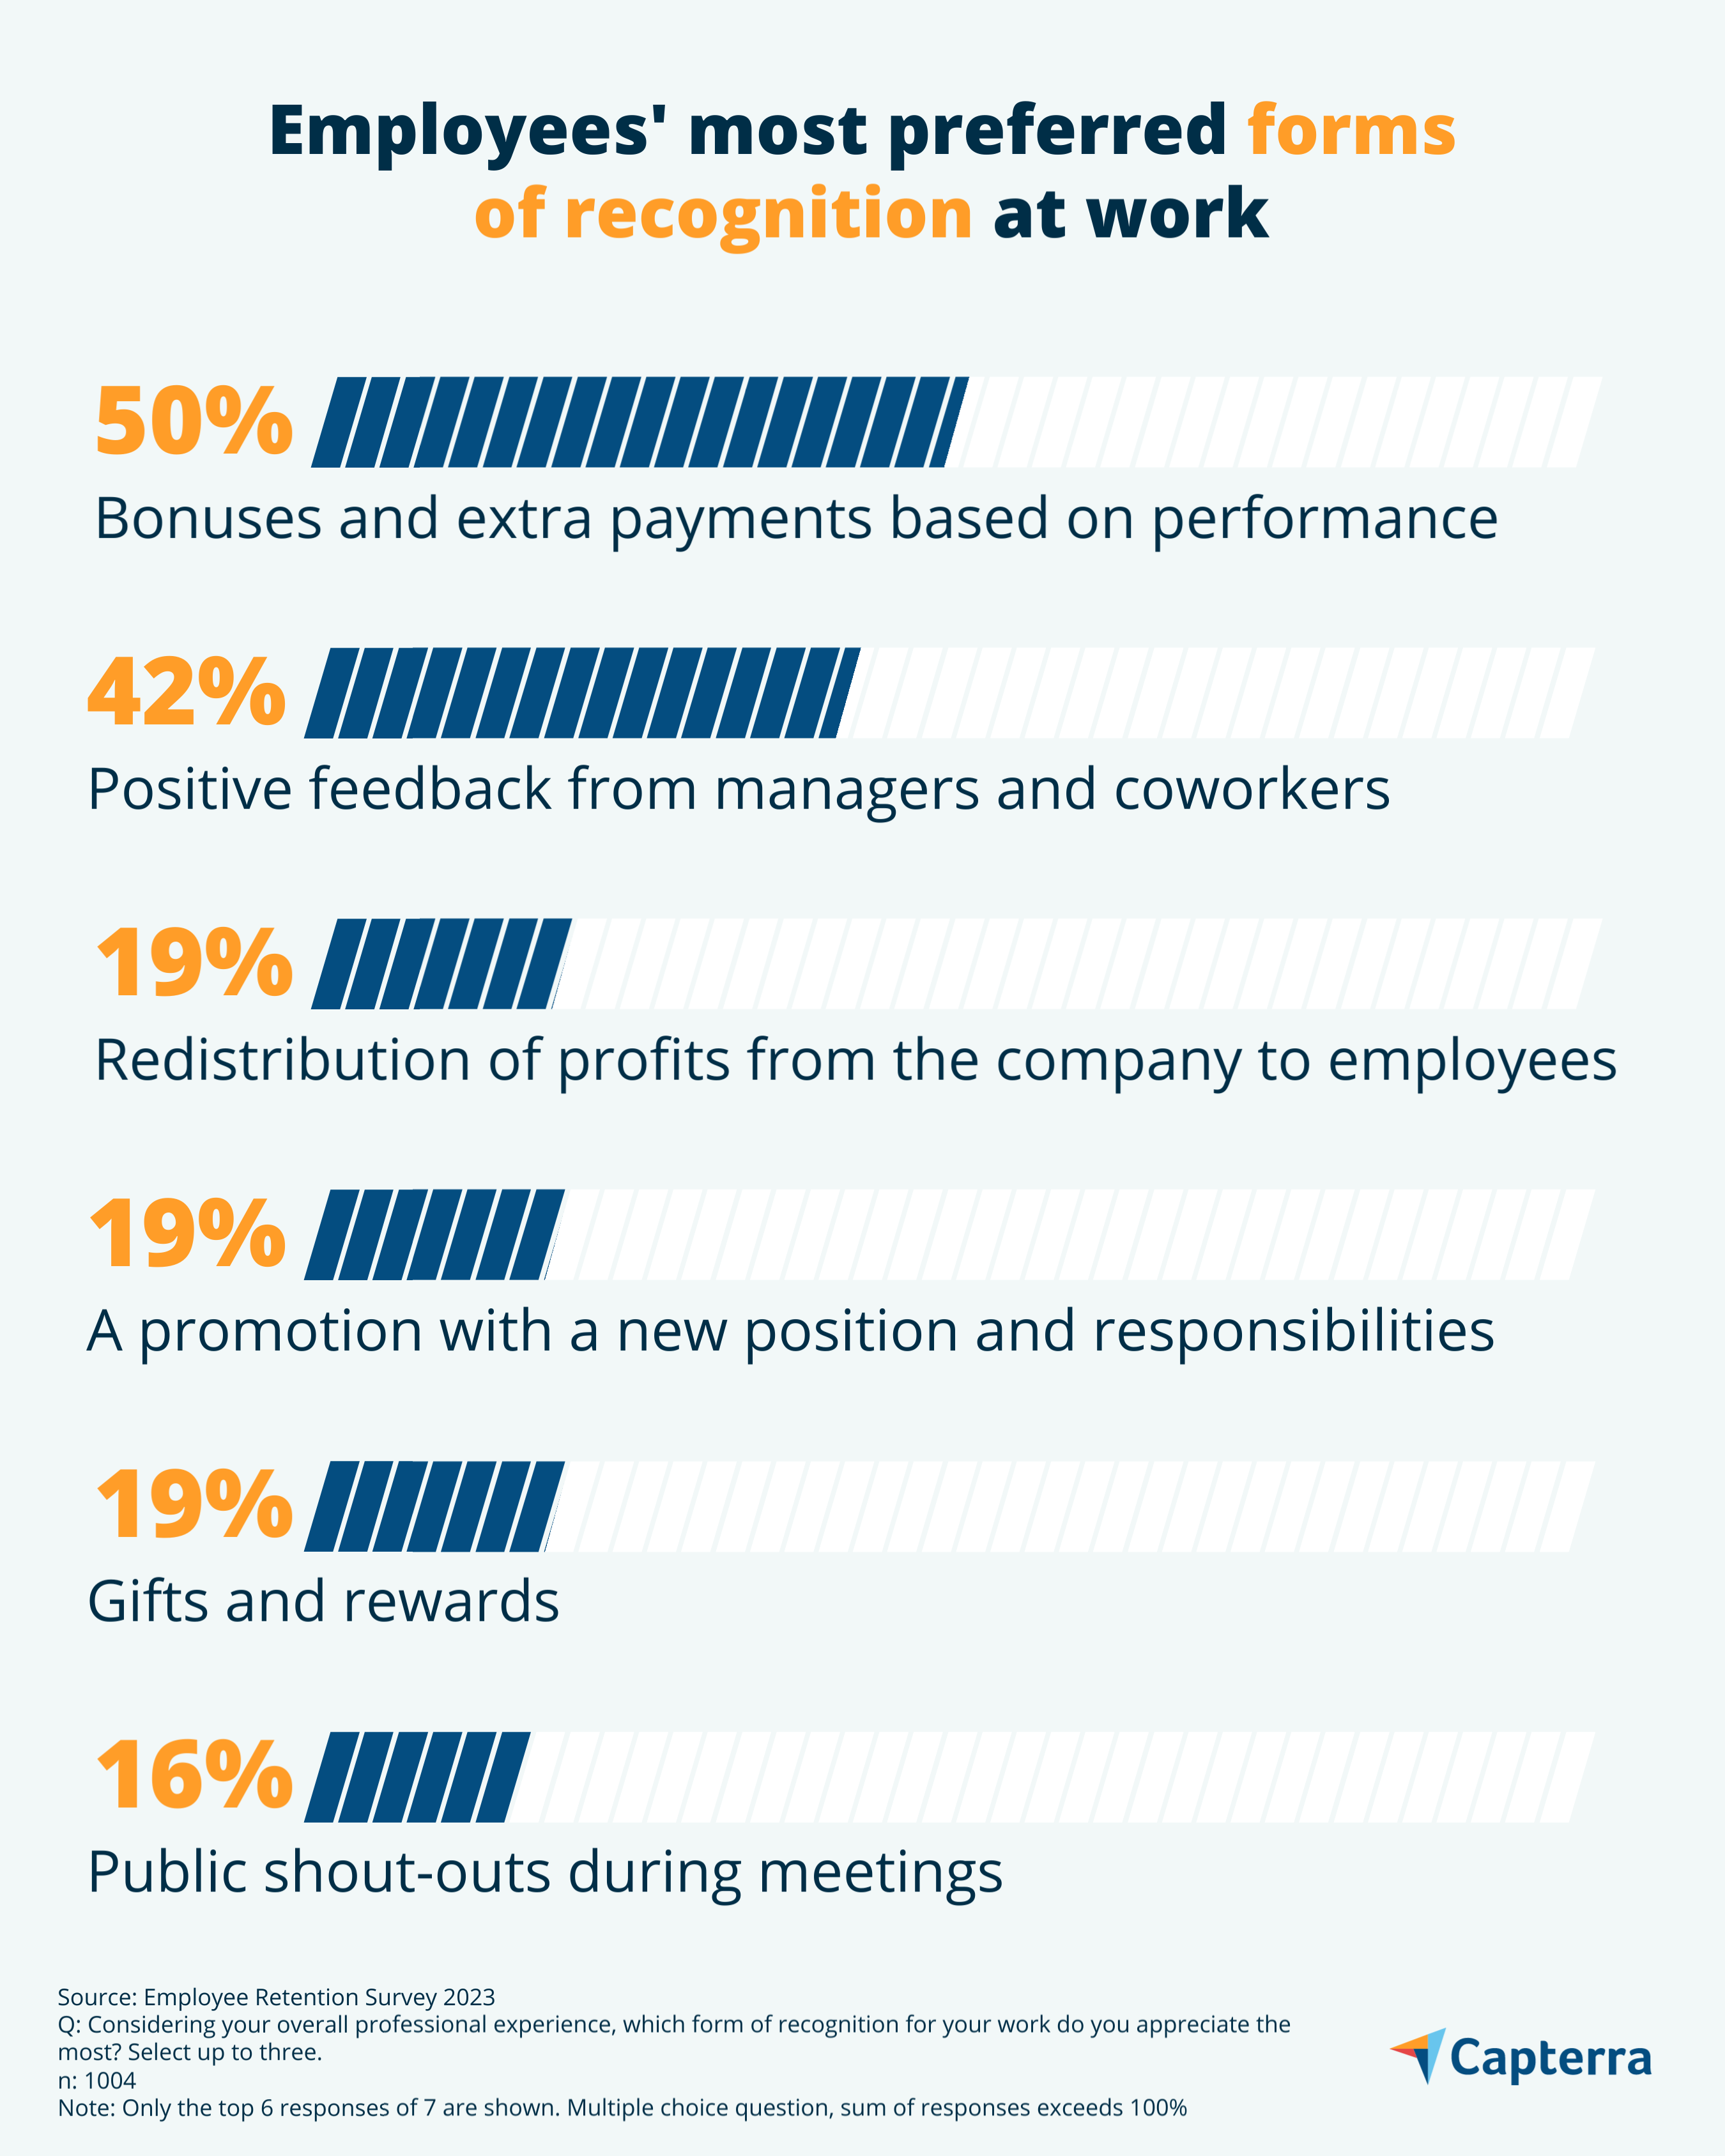 employee recognition methods that can be used for employee retention strategies